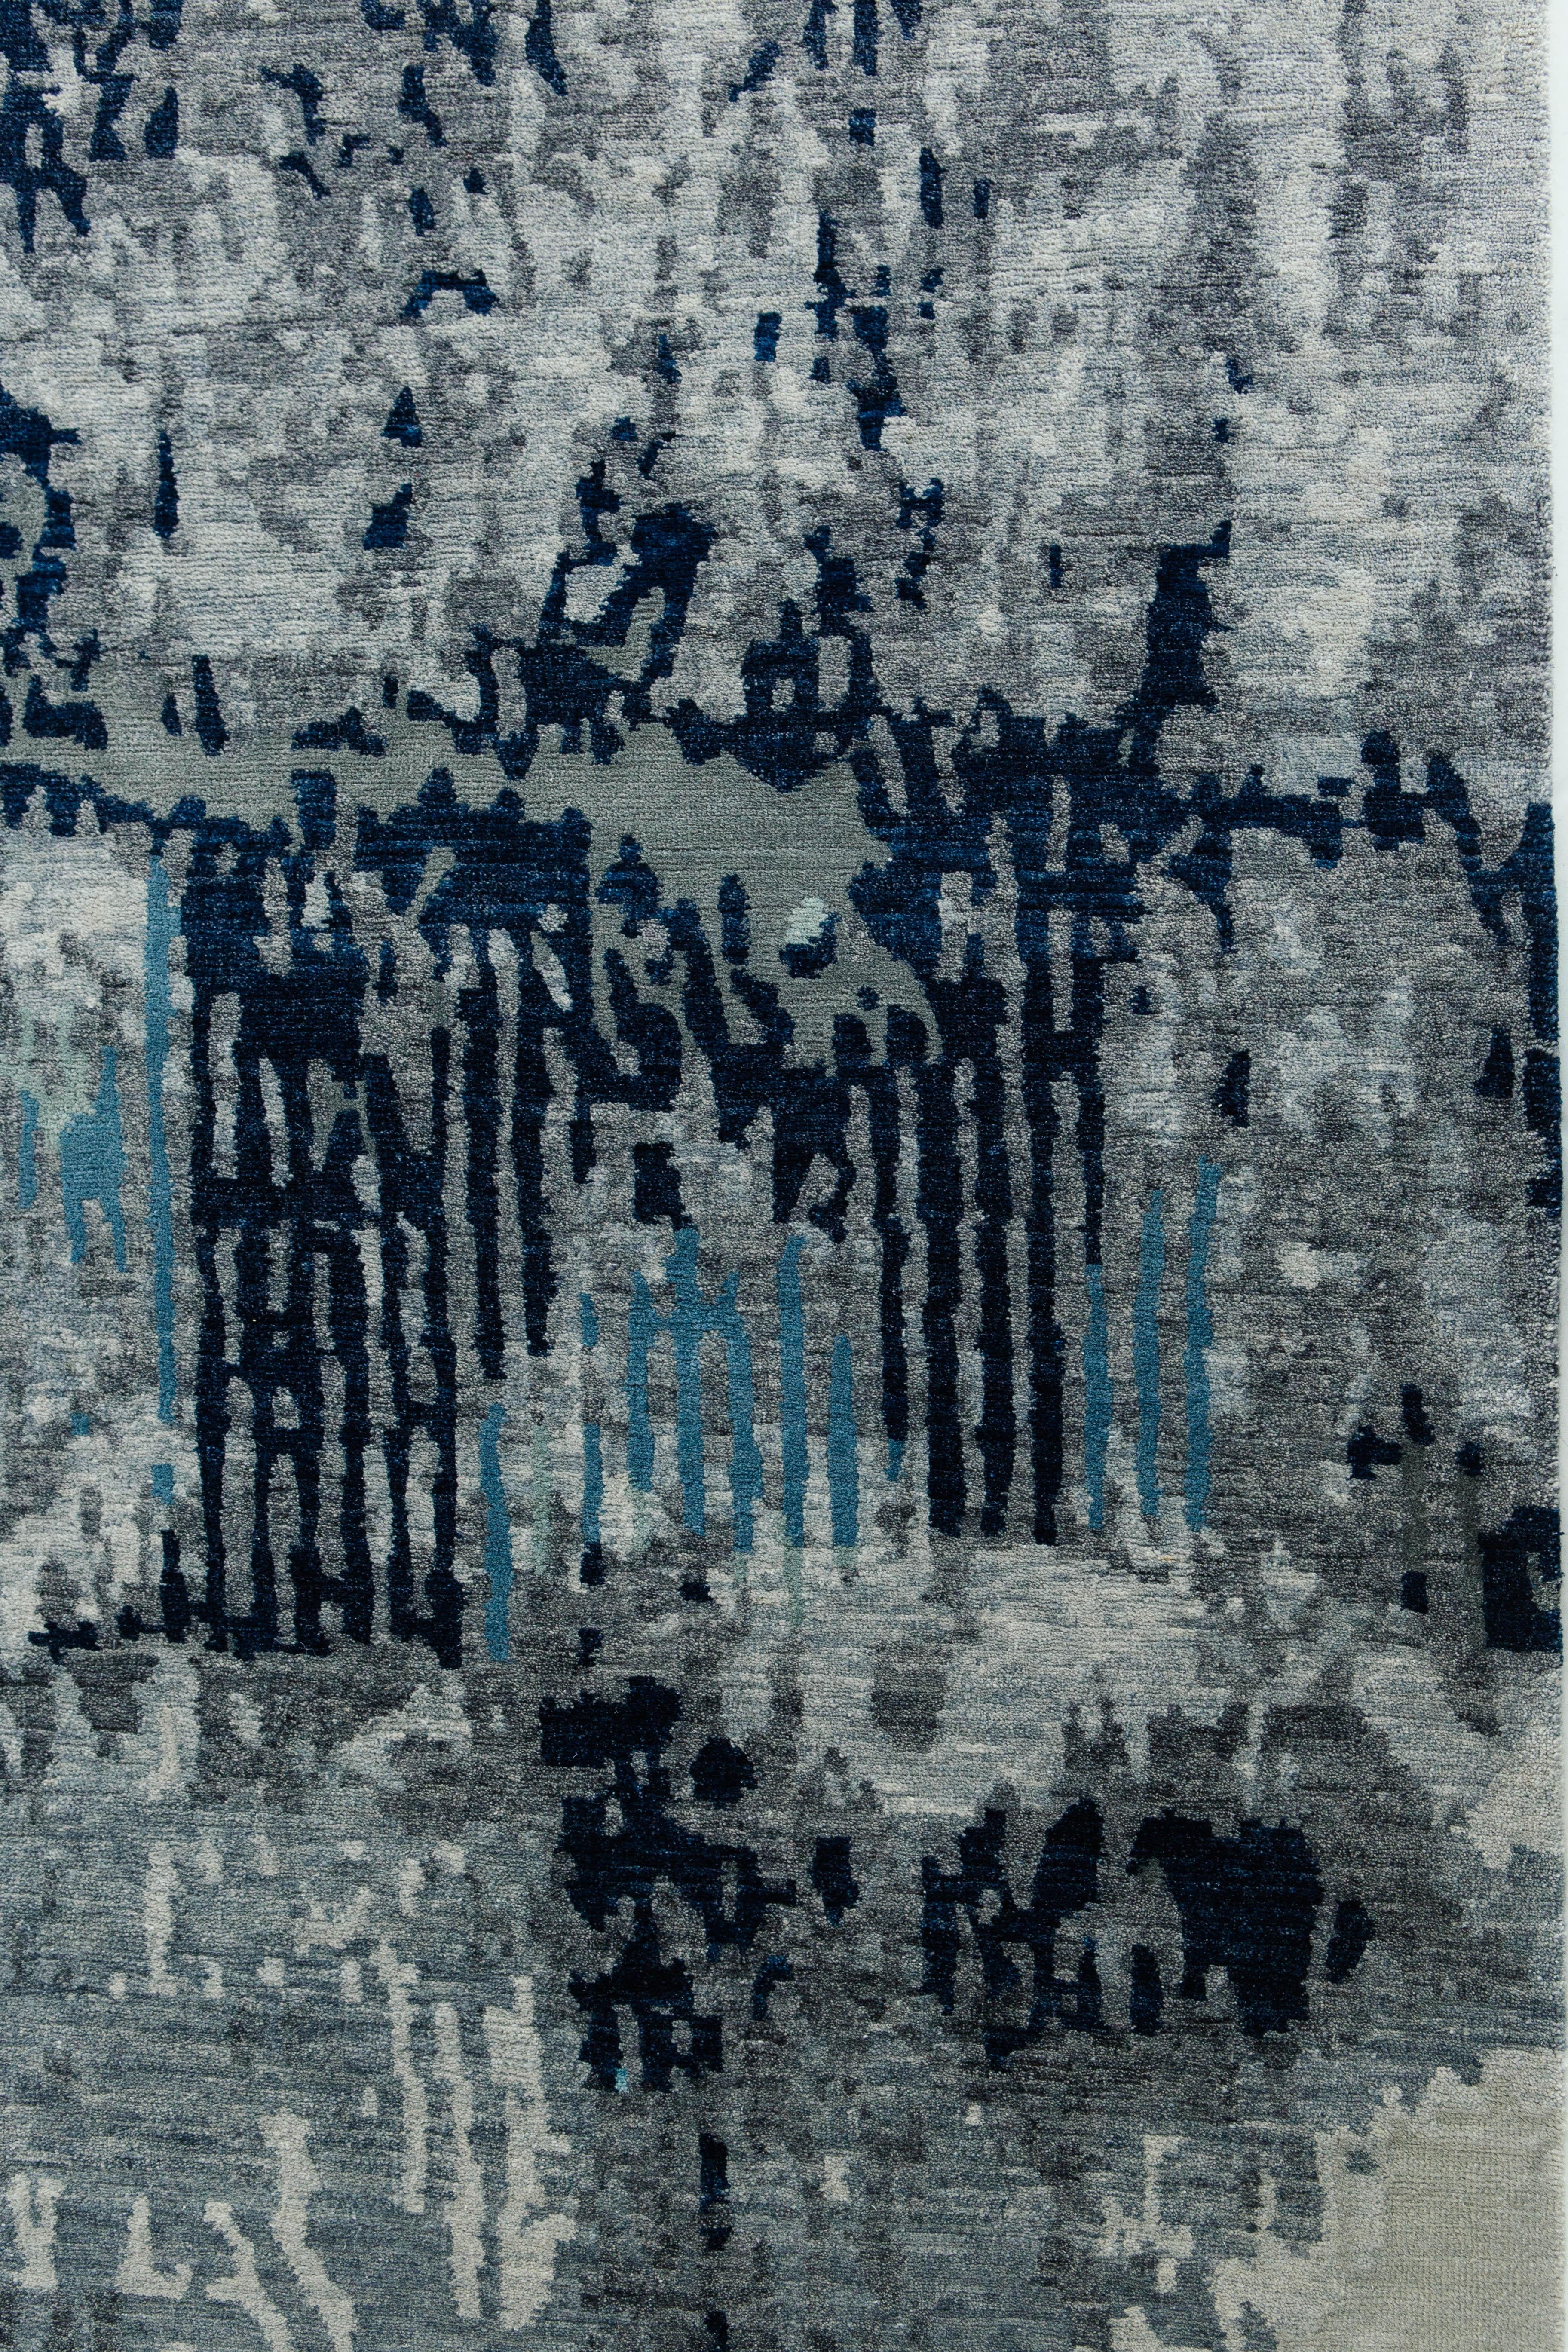 Inviting blues and grays work together to create a simple yet interesting design. This wool and silk piece invites a repeating effect of abstract lines which makes the rug a one of a kind, unique piece


Rug number 26375
Size 9' 0